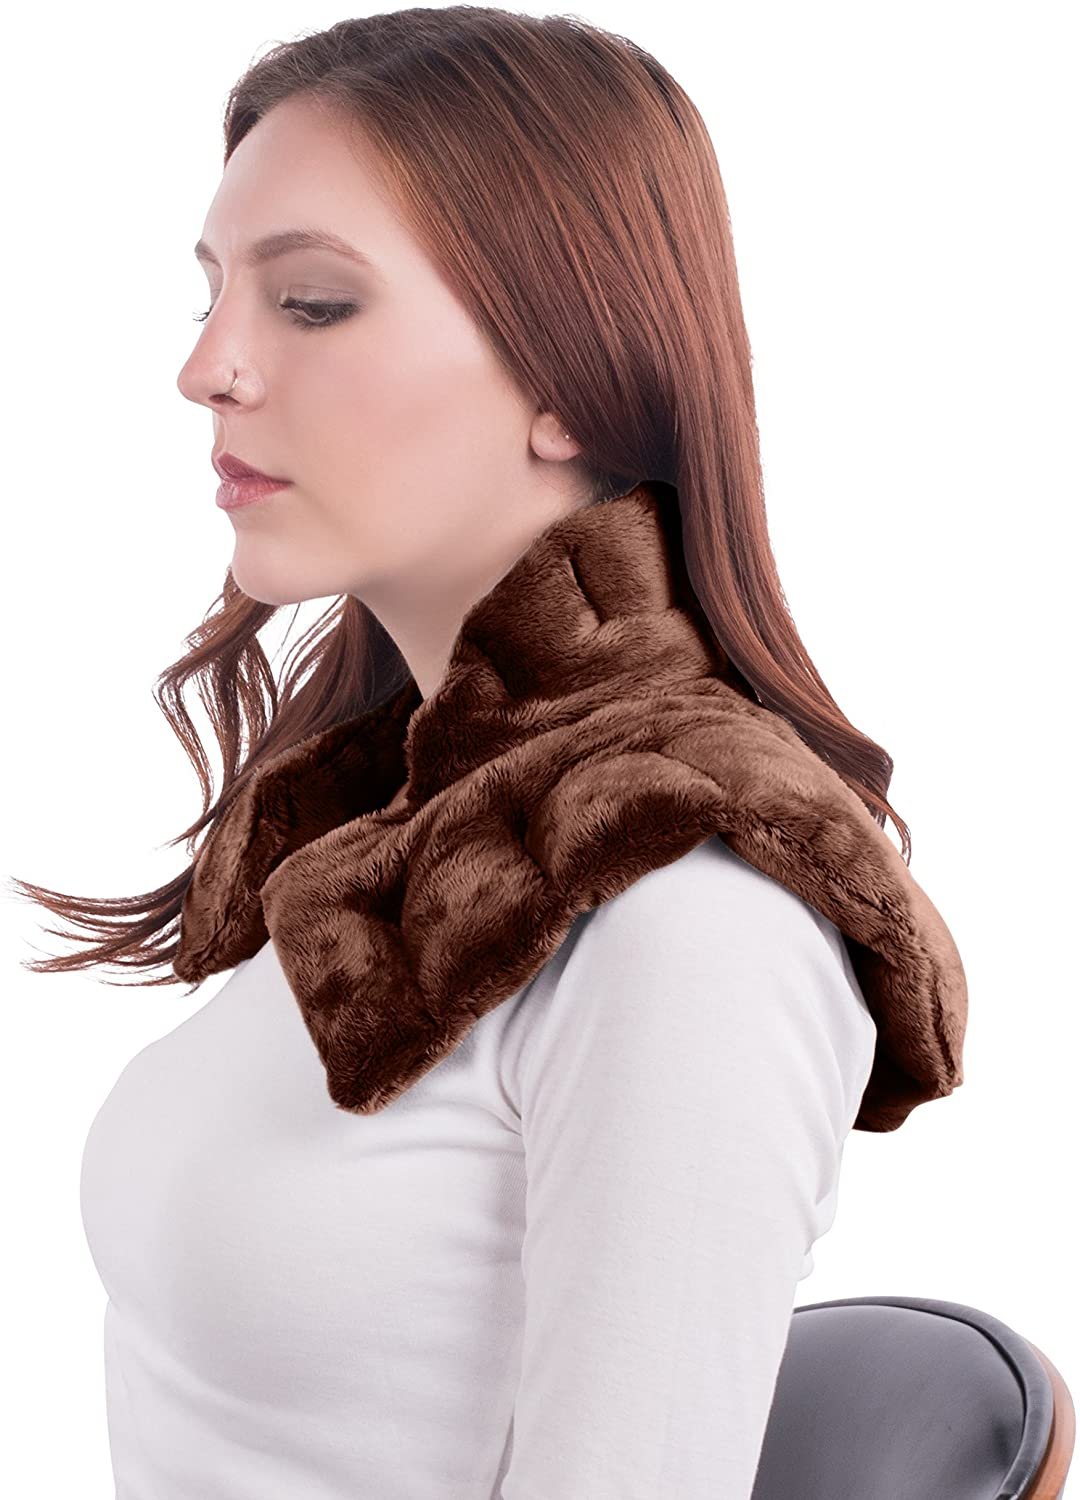 Heated Microwaveable Neck and Shoulder Wrap - Herbal Hot/Cold Deep Penetrating Herbal Aromatherapy (Charcoal) - Mars Med Supply